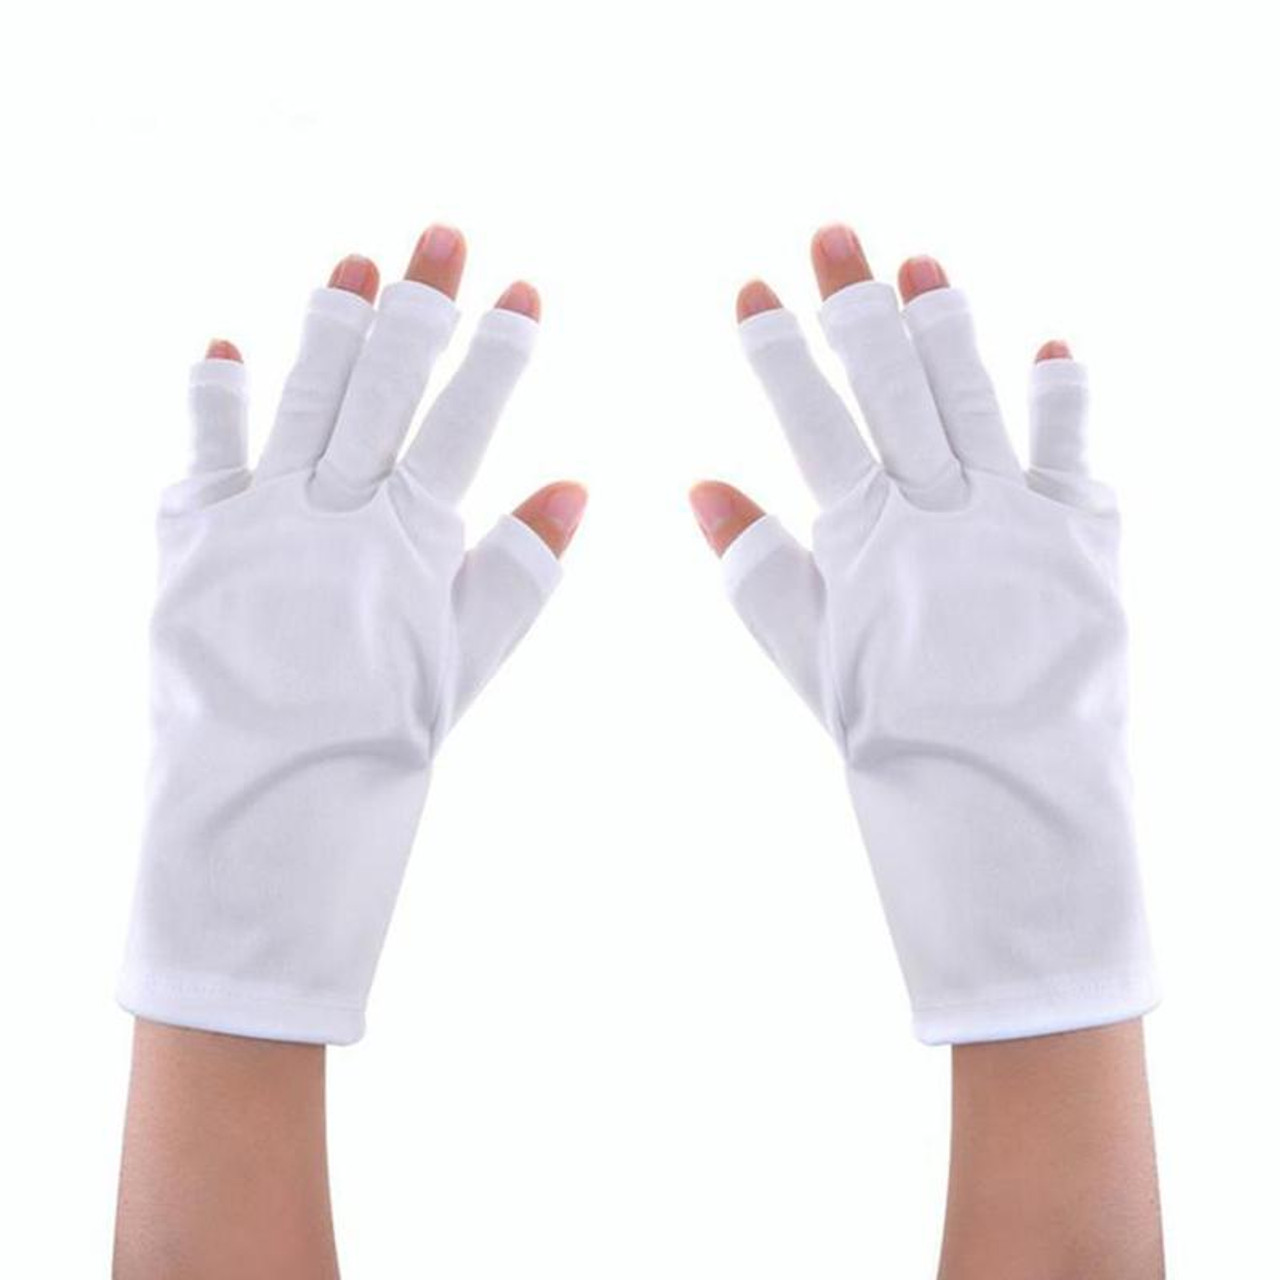 https://cdn11.bigcommerce.com/s-12568/images/stencil/1280x1280/products/421/10680/white_uvprotectiongloves_2__40106.1598292575.jpg?c=2